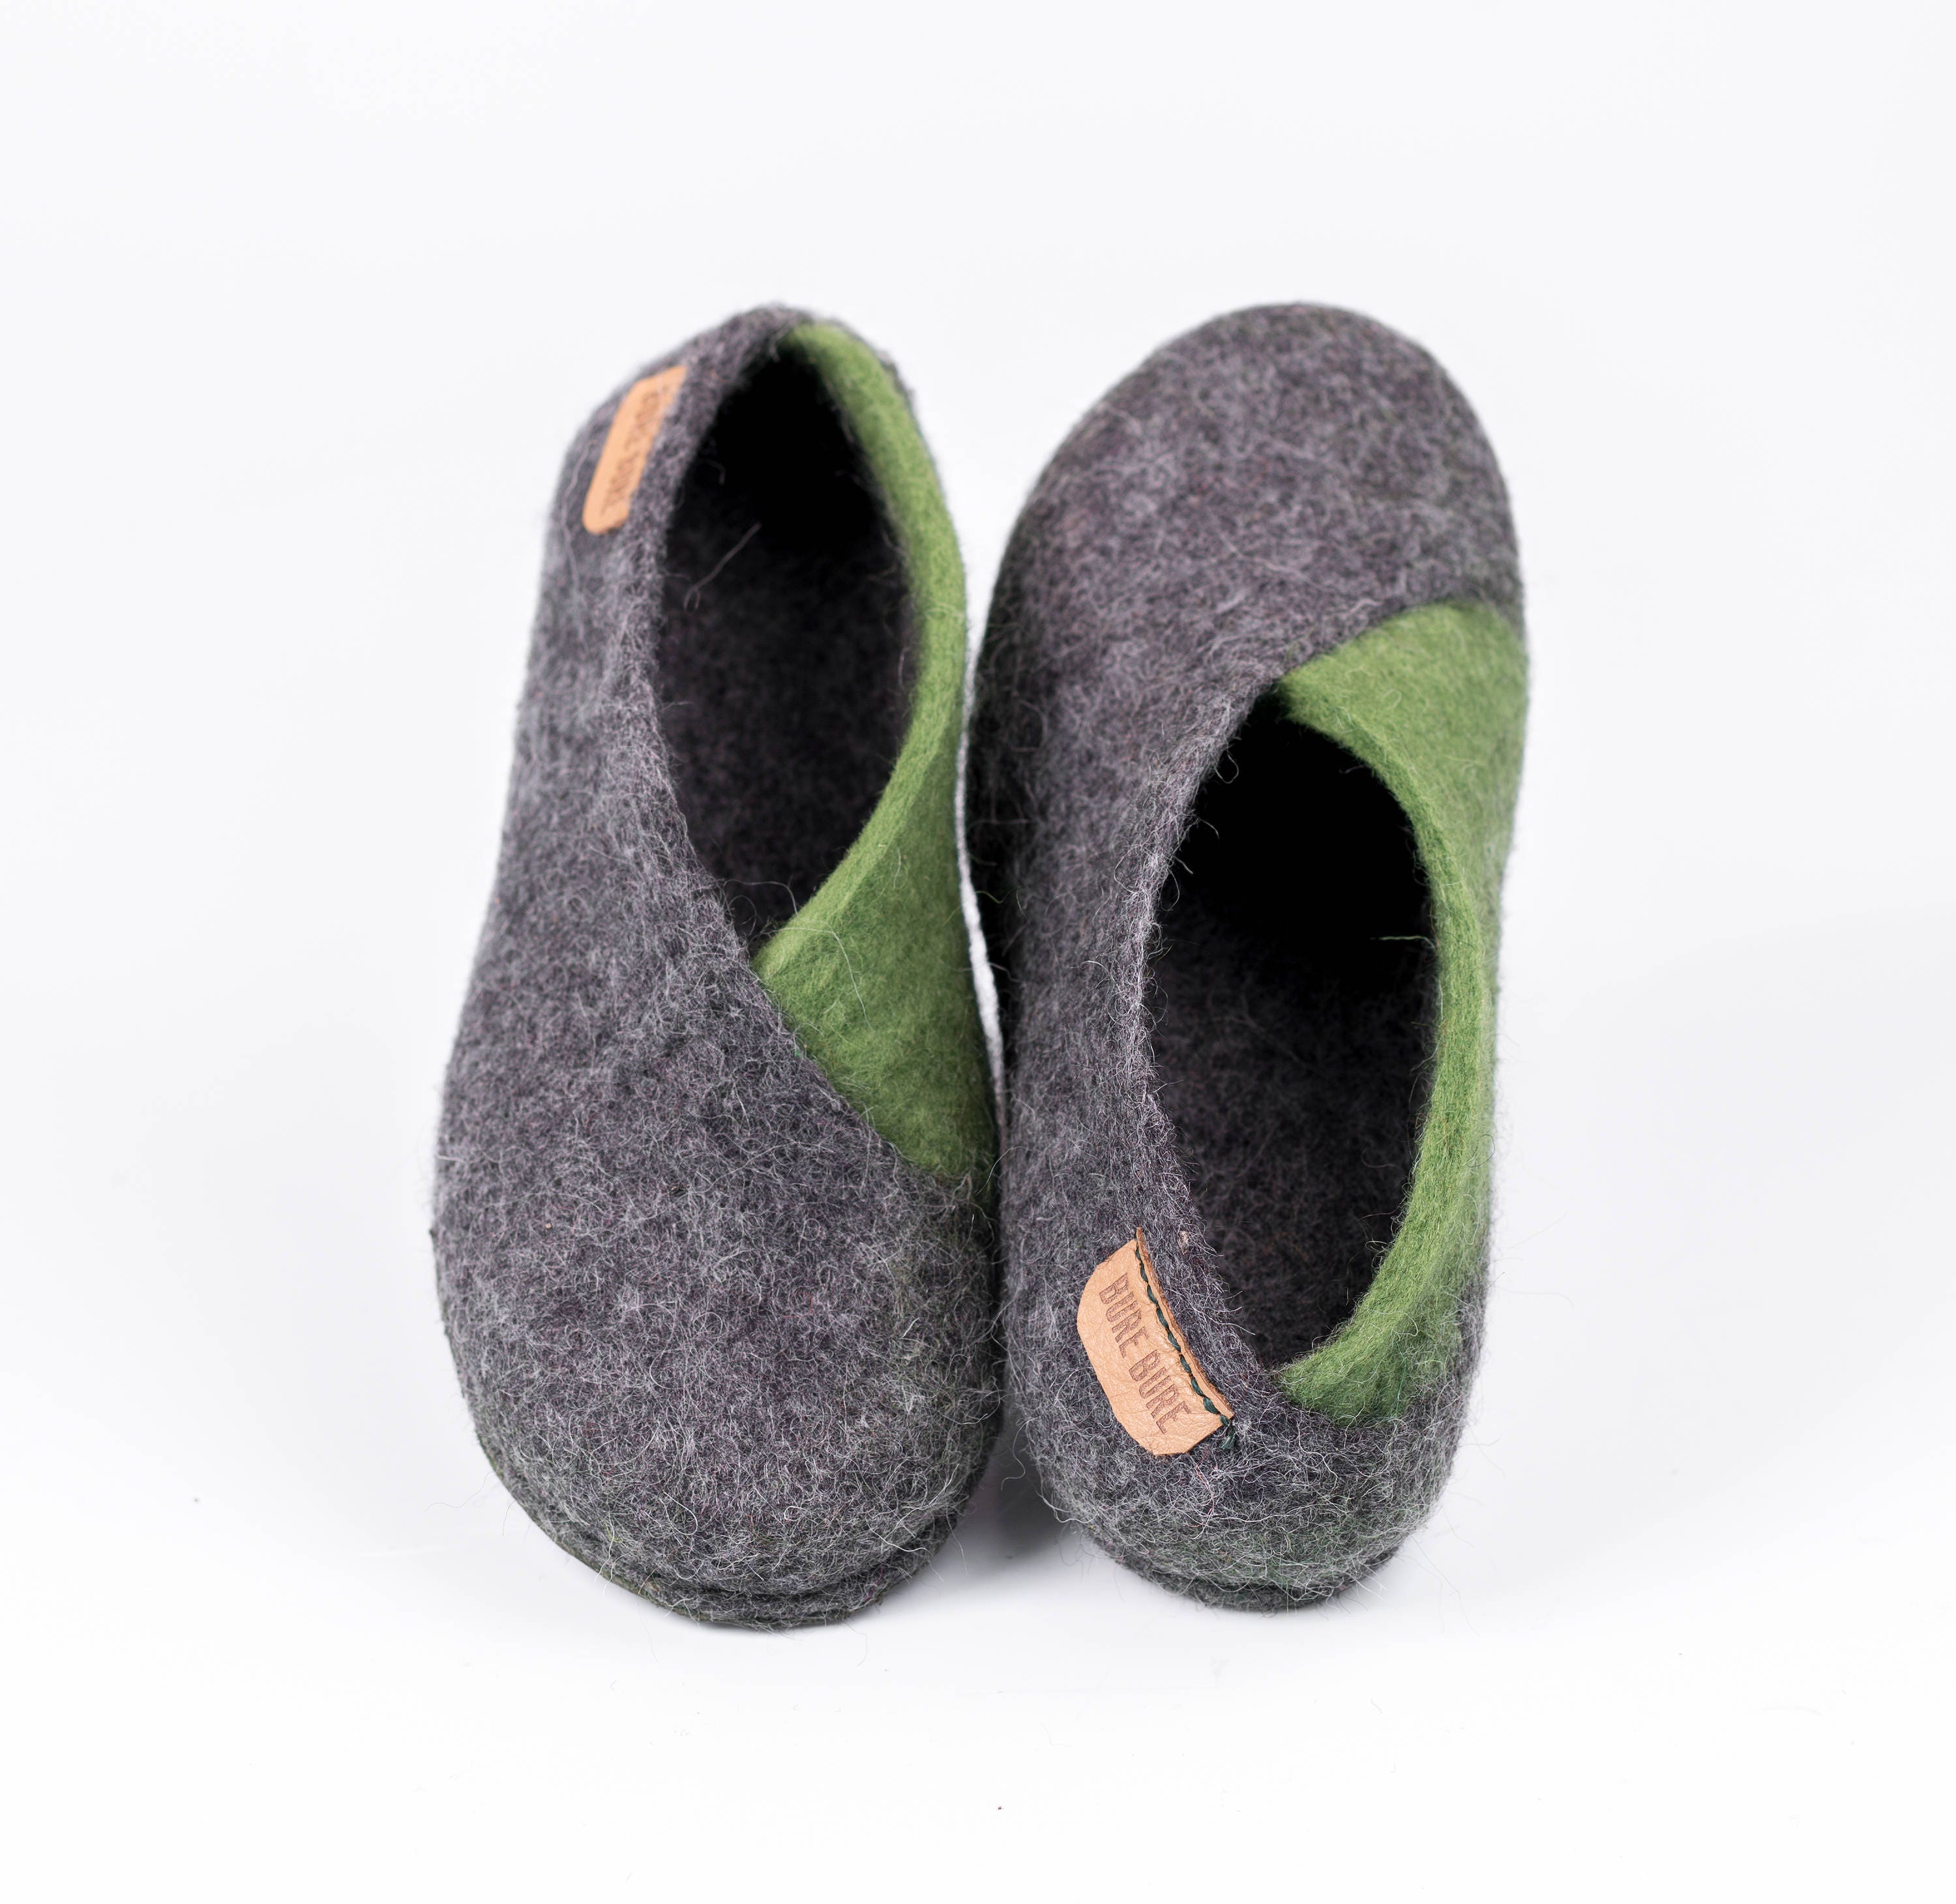 At deaktivere heltinde Inspiration Cozy Women home shoes, Handmade slippers, Felted shoes felt wool slippers  womans slippers spring shoes gift for her